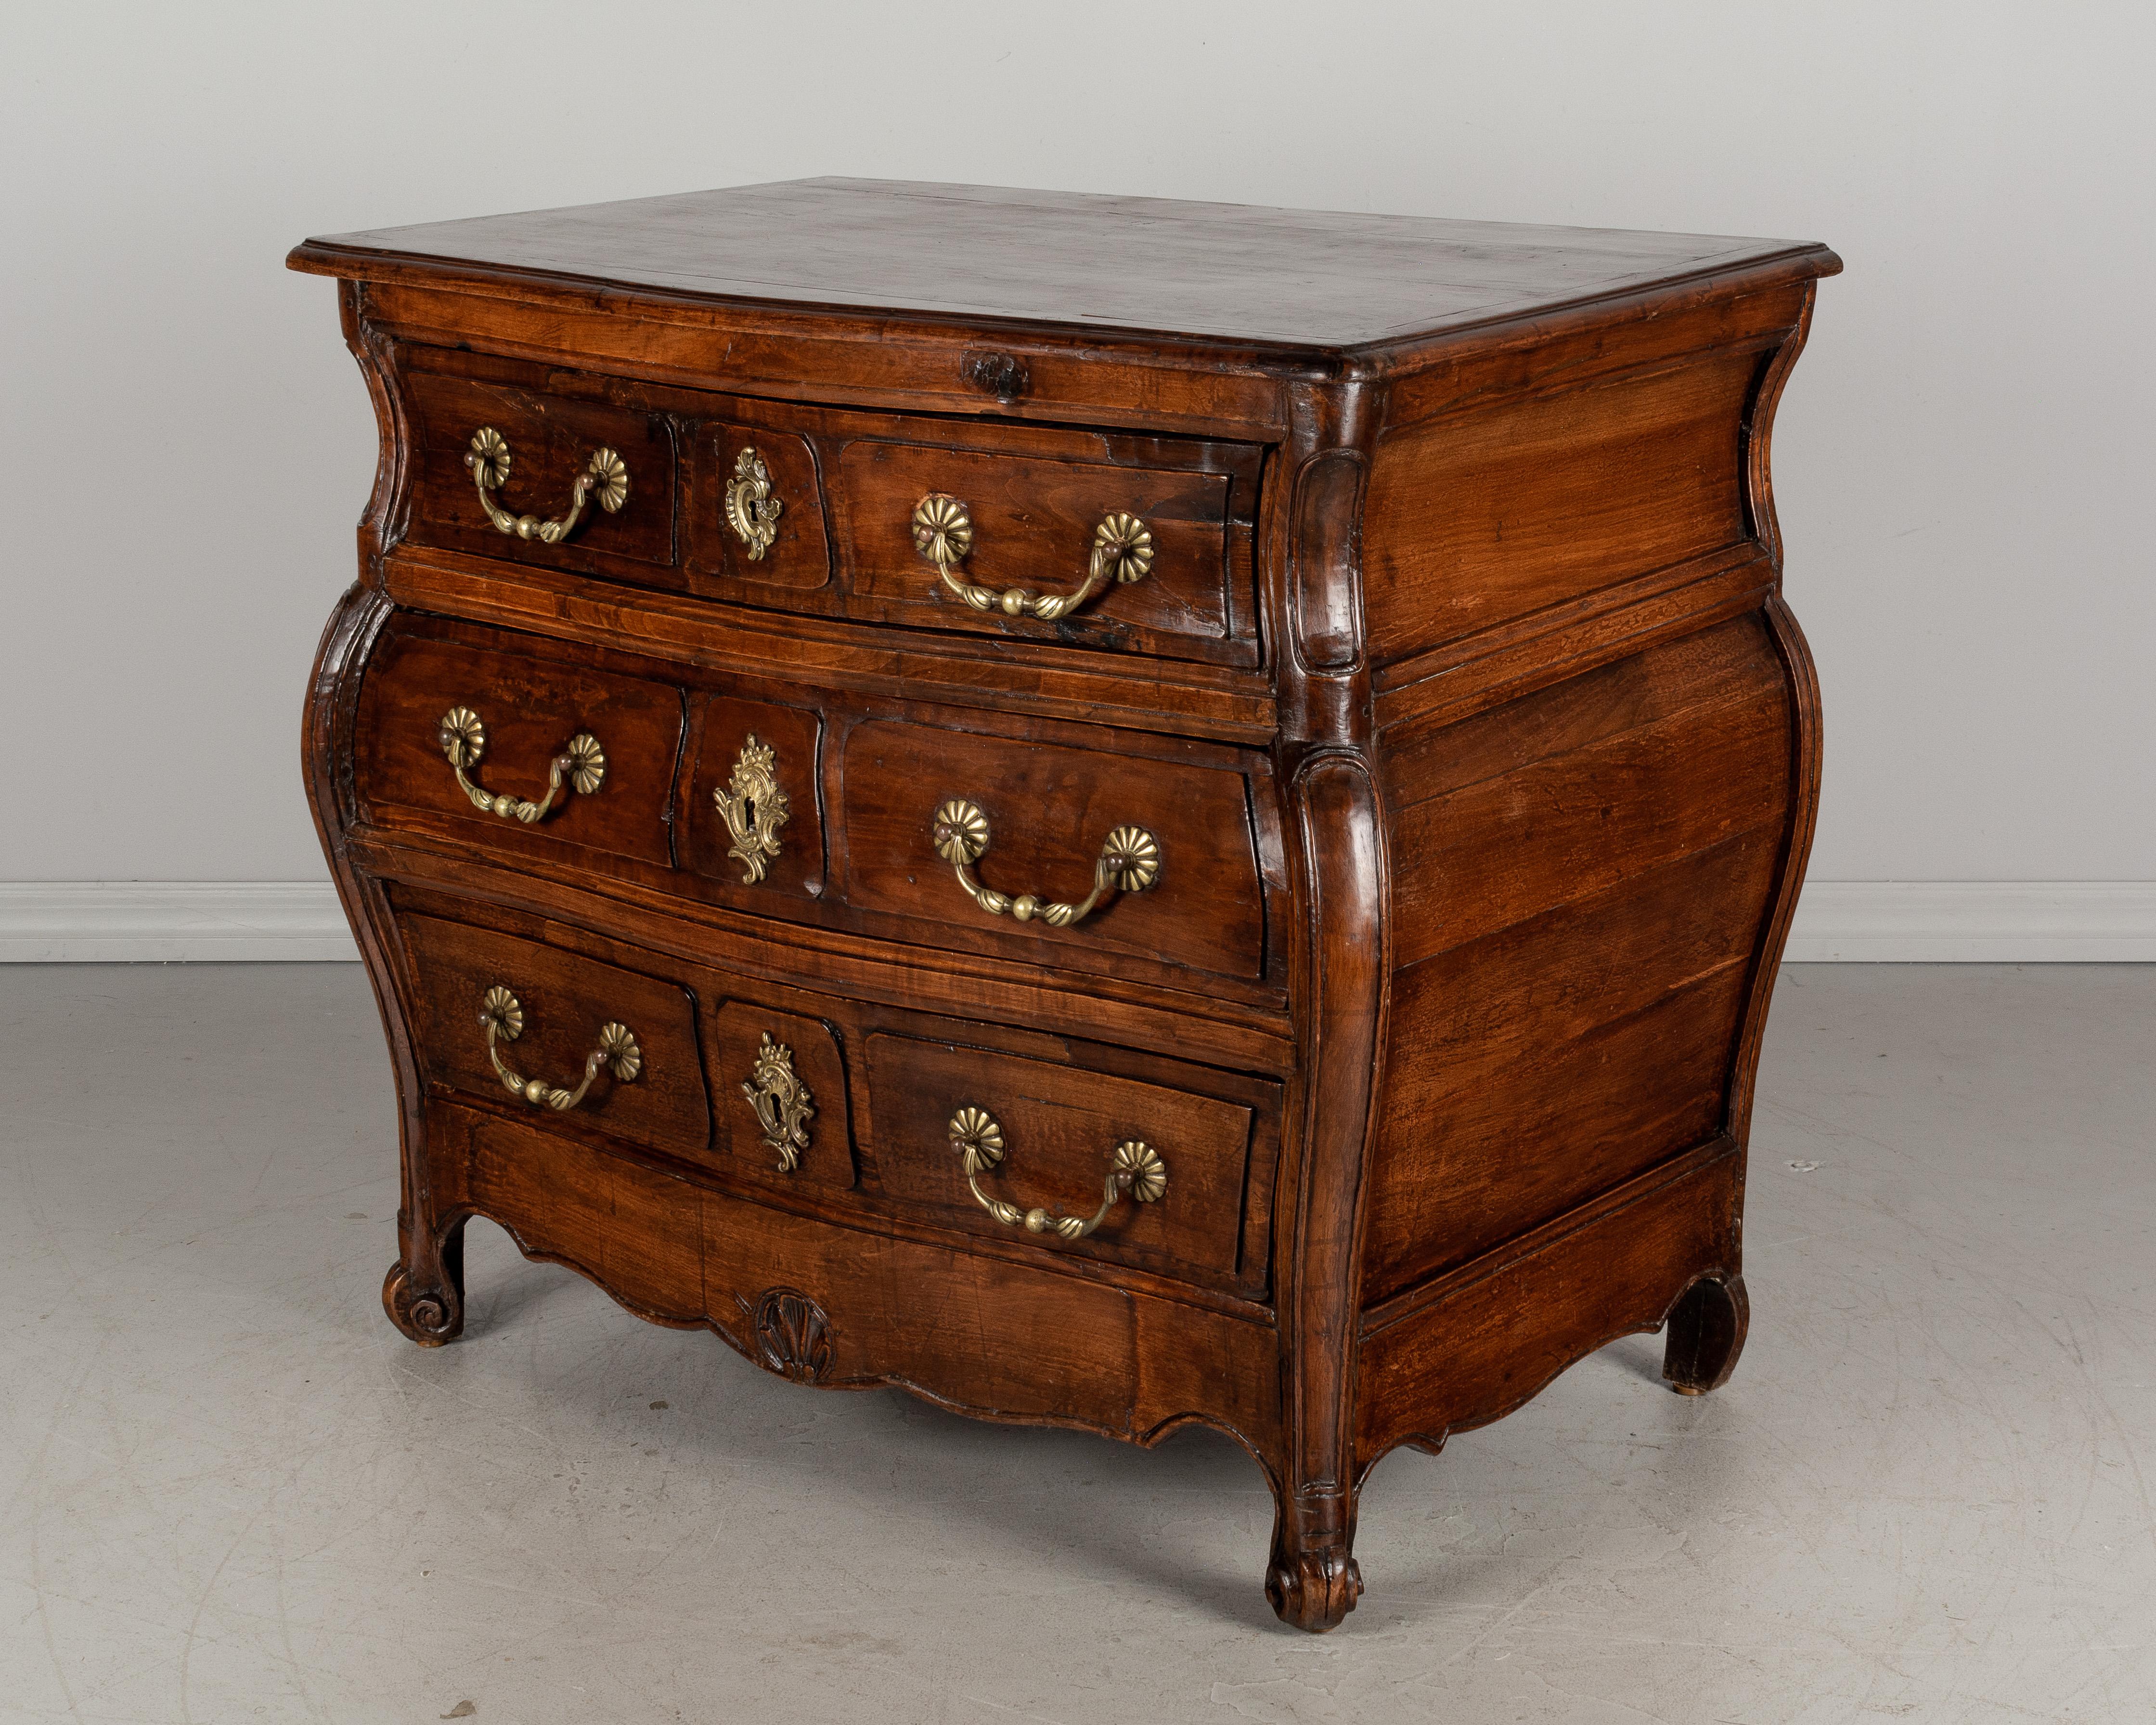 An 18th century French Louis XV style commode, or chest of drawers, from the Bordeaux region made of solid cherry wood. Small in scale with nice proportions and bombé form. Three dovetailed drawers with fabric lining. Original bronze hardware.